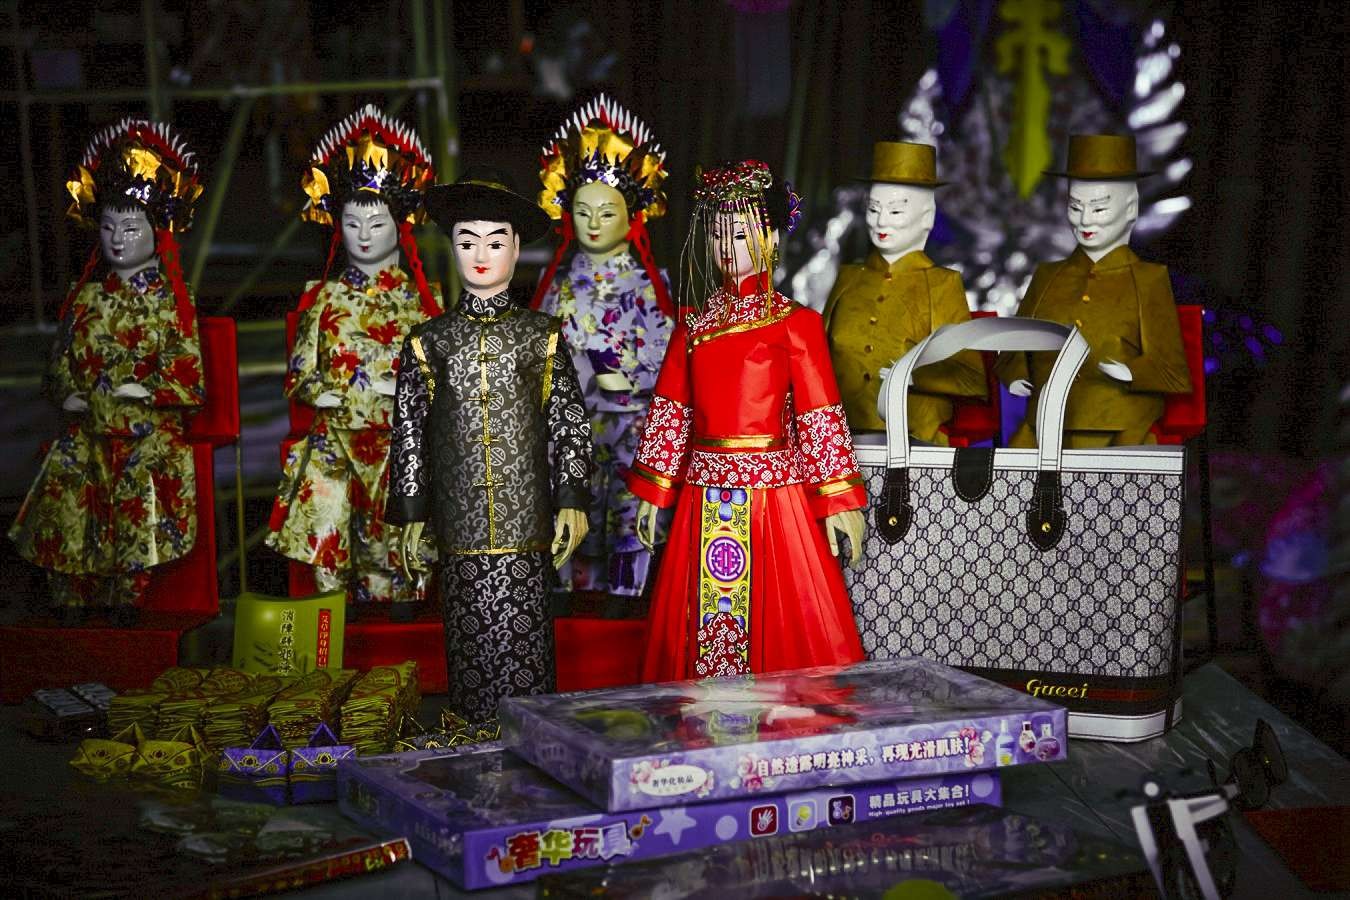 Dolls as representation of the dead couple getting married during a 'ghost marriage' ceremony. Image from SCMP